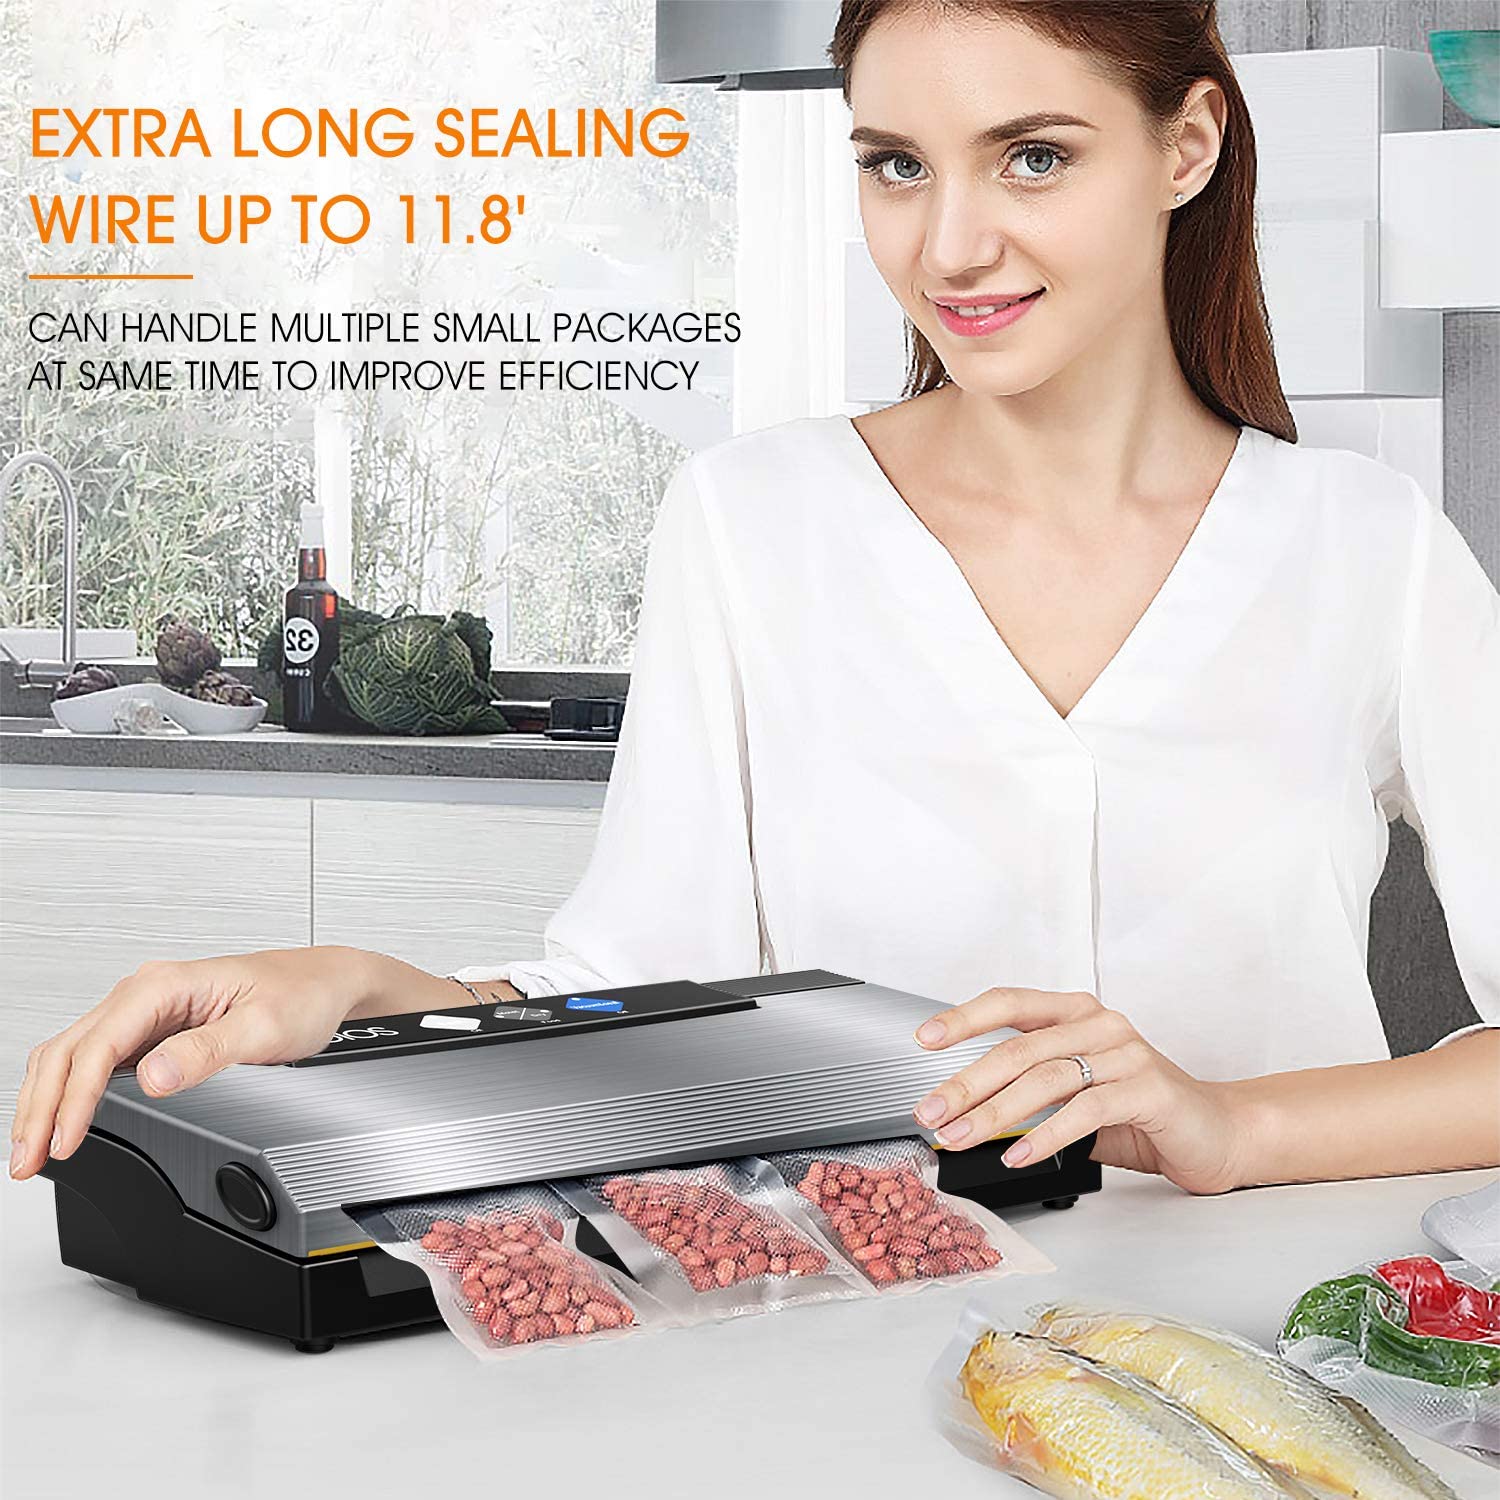 KOIOS Vacuum Automatic Food Sealer with Cutter - Demine Essentials